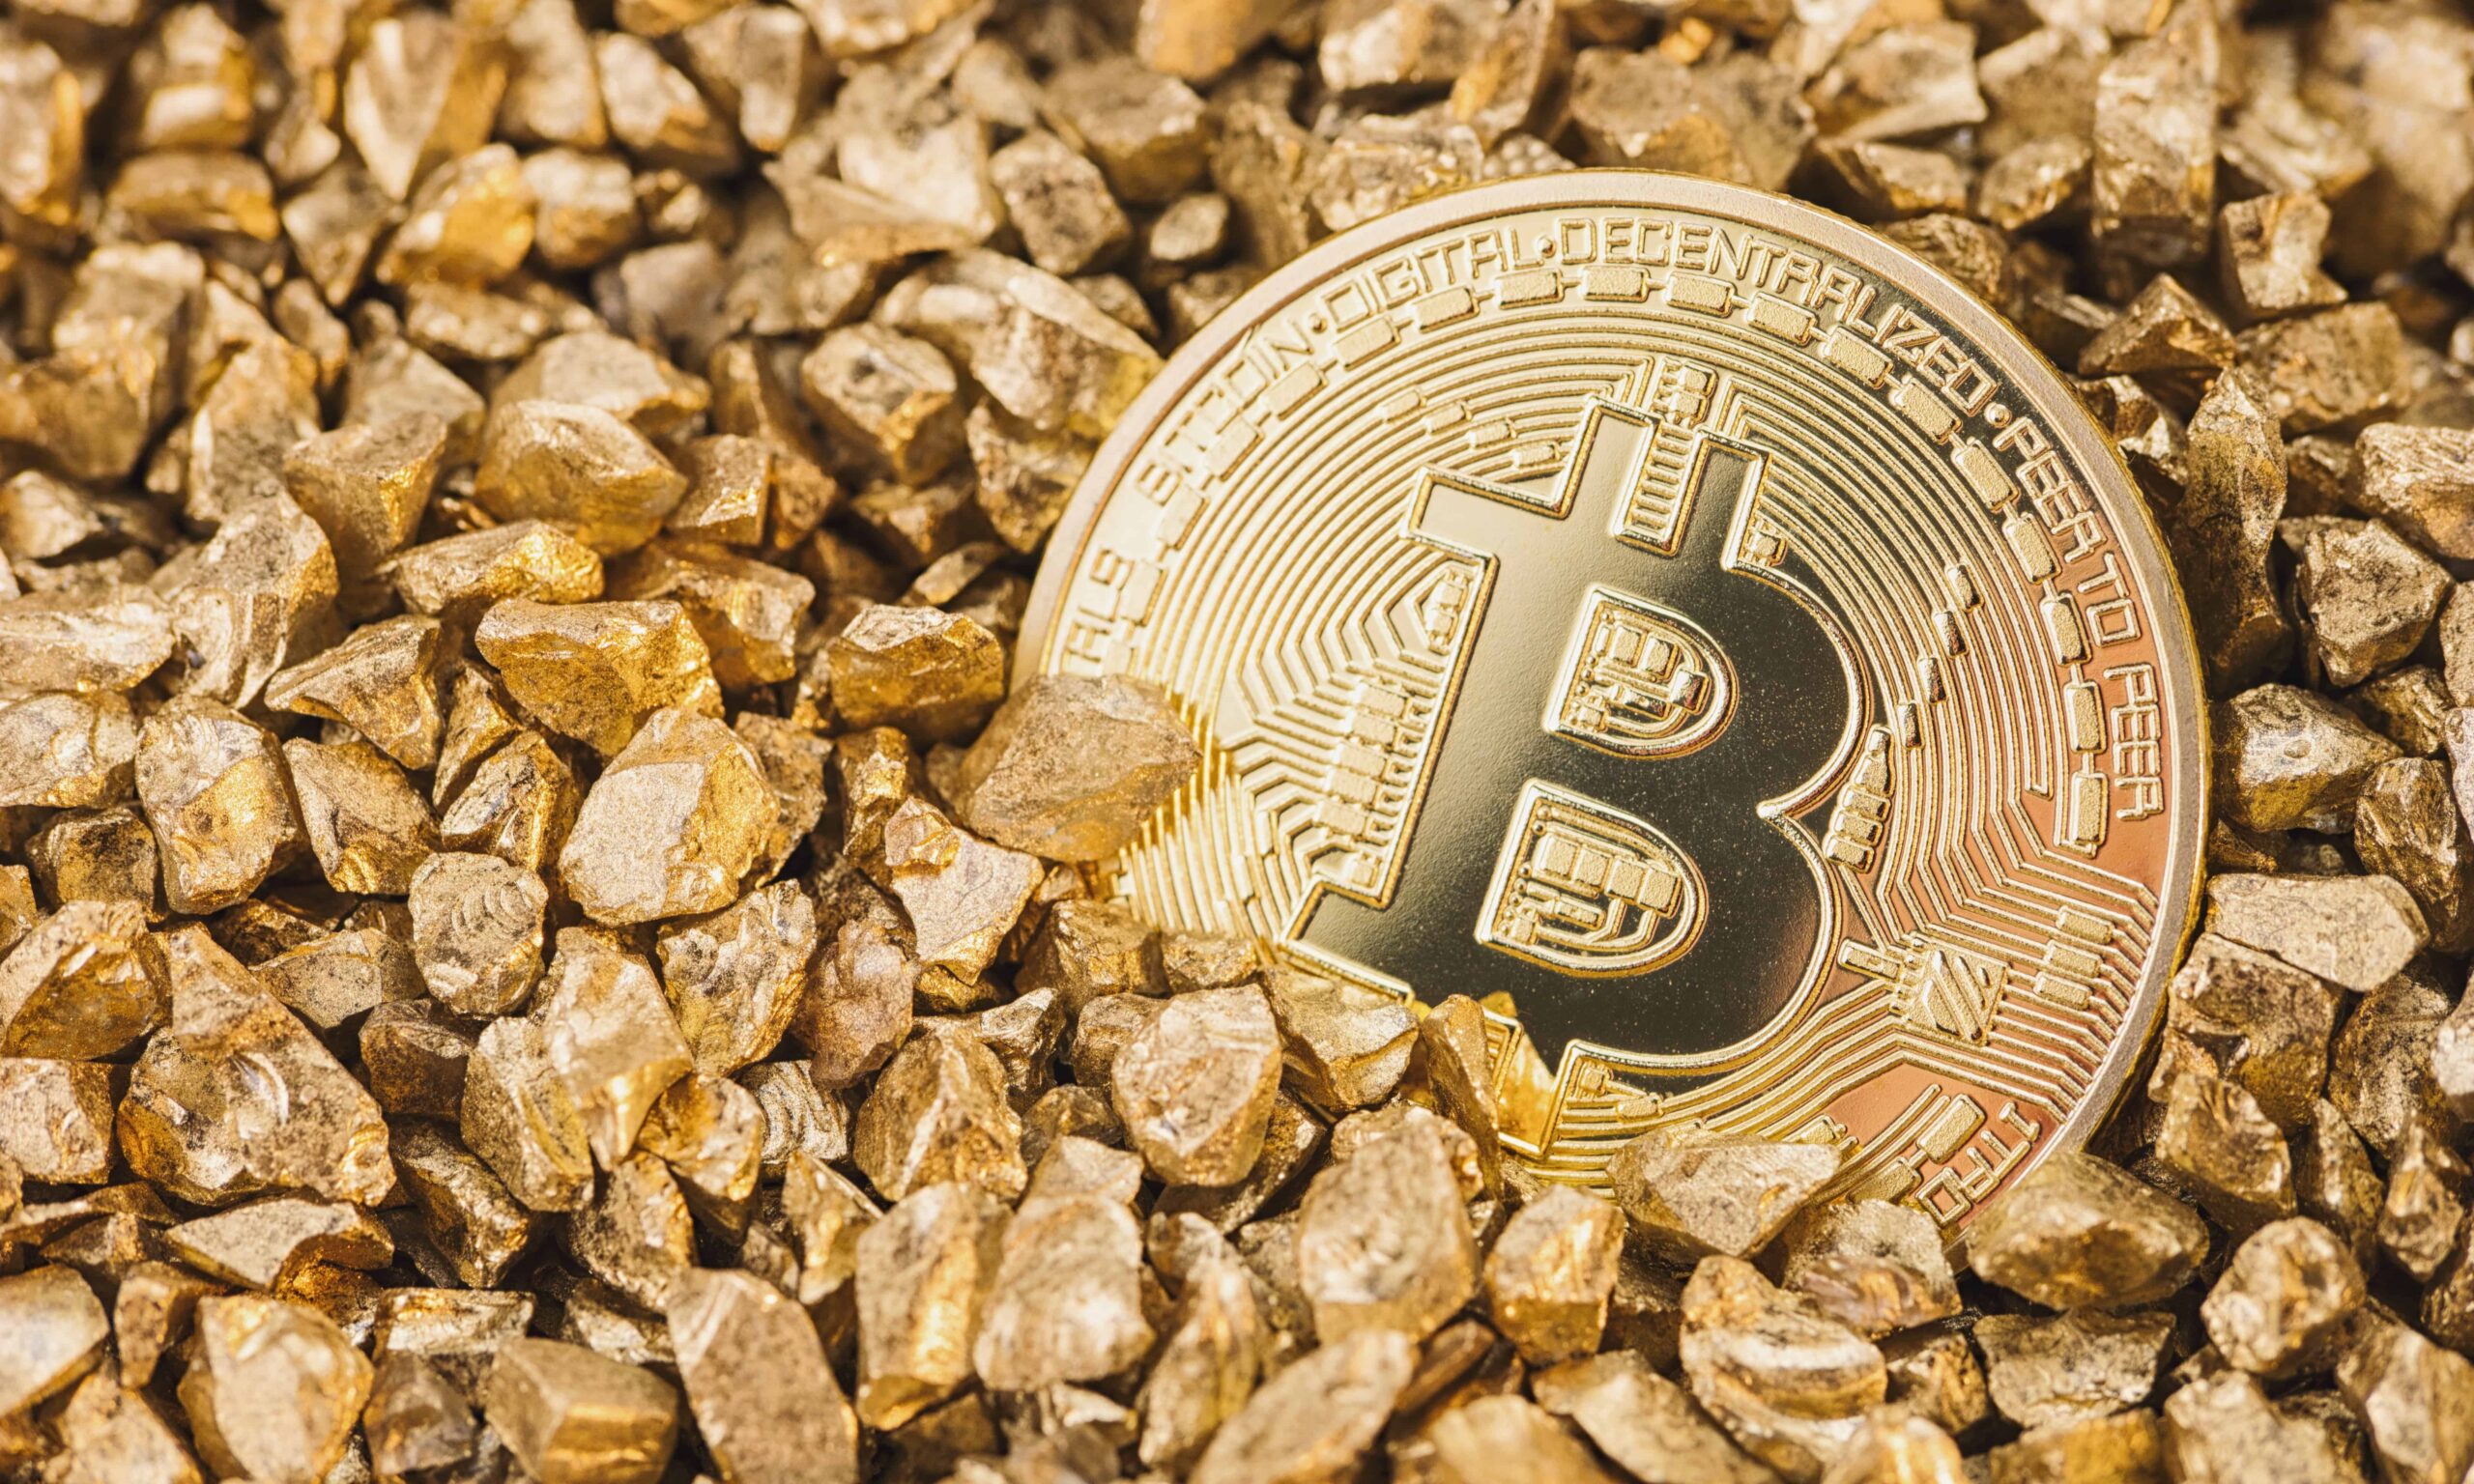 bitcoin virtual cryptocurrency in a heap of gold nuggets bitcoin hype concept image ideal for websites and magazines layouts scaled